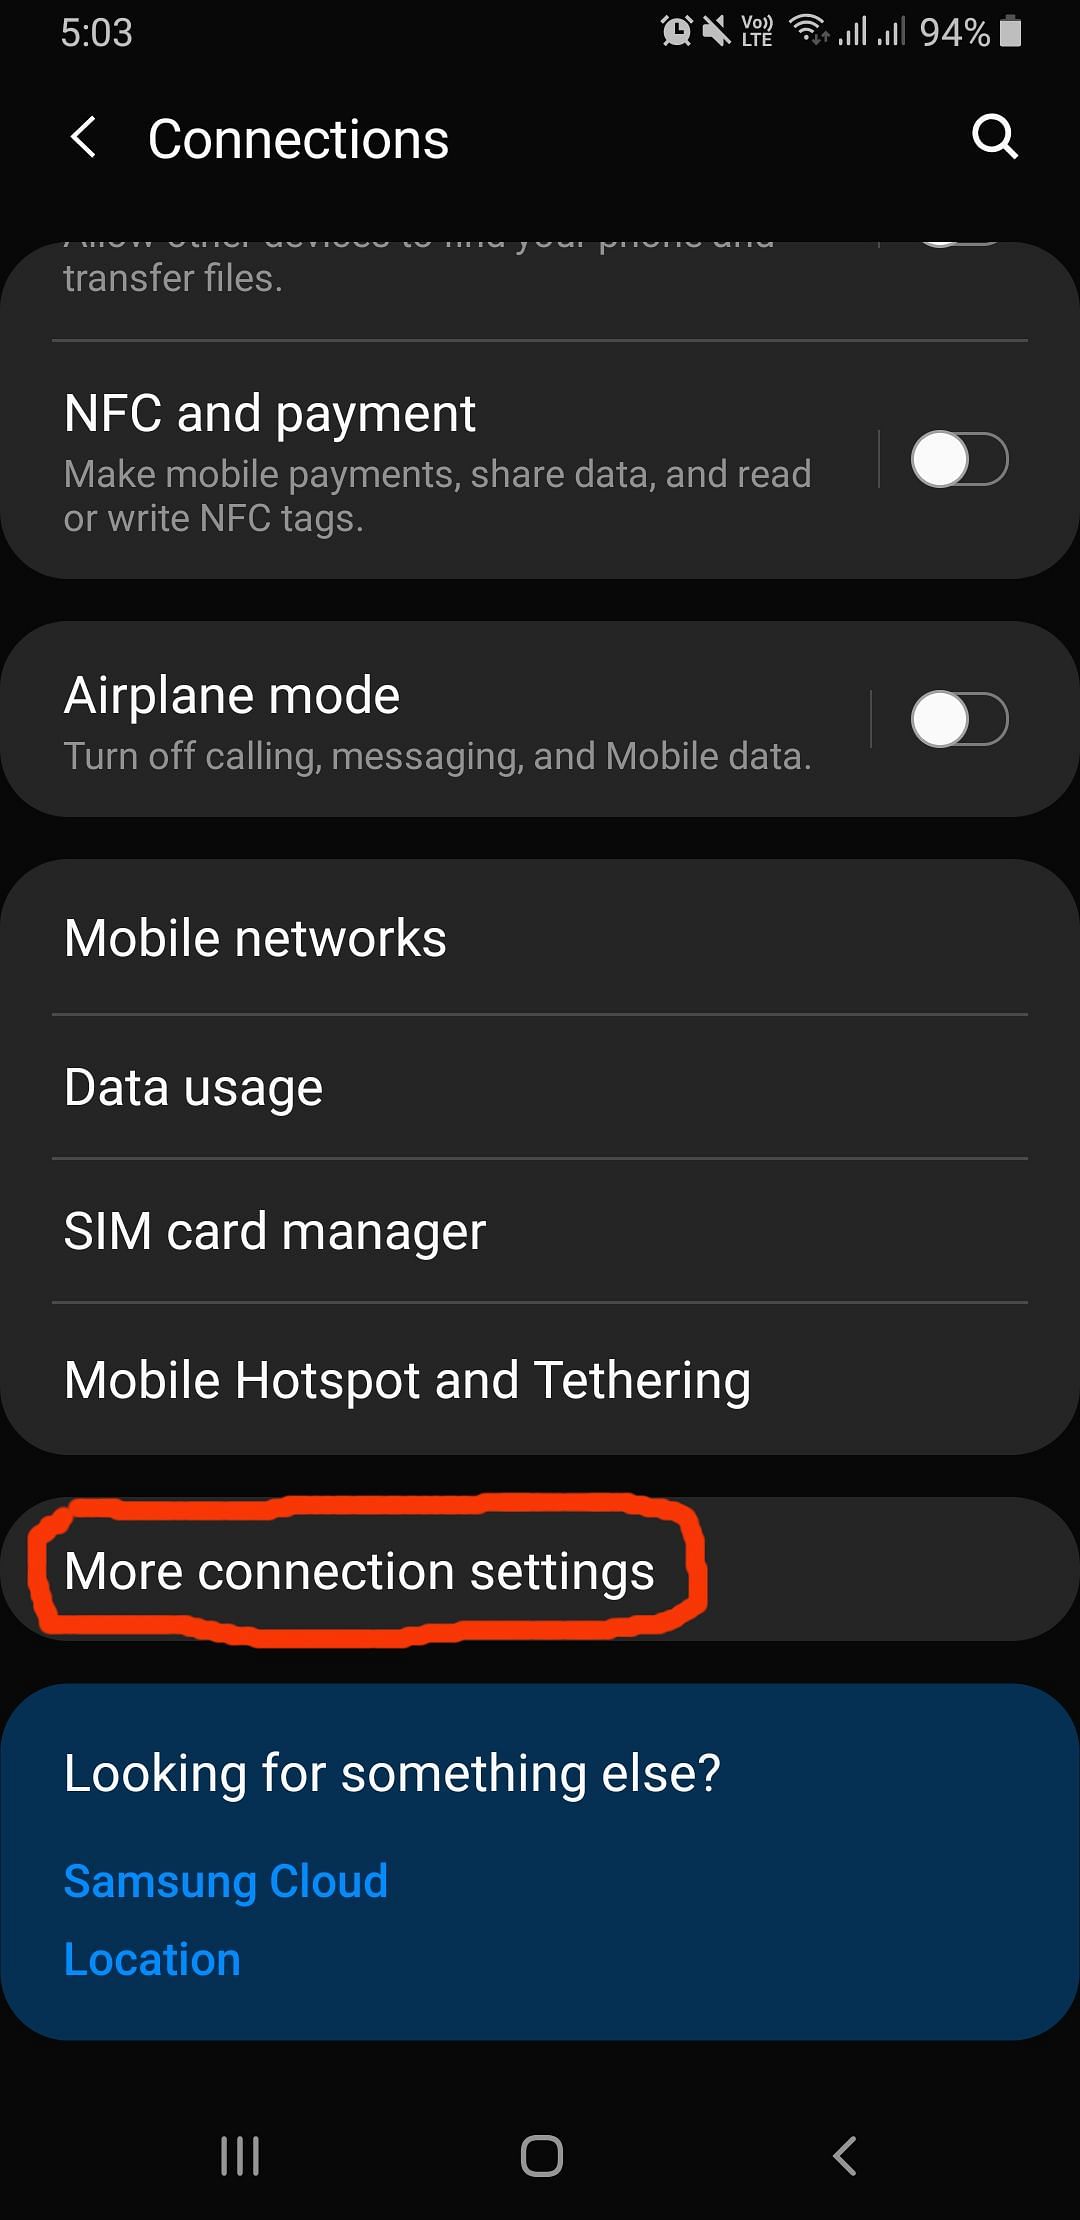 All Android phones have a VPN feature built-in, but it’s not very easy to setup if you are not tech savvy.